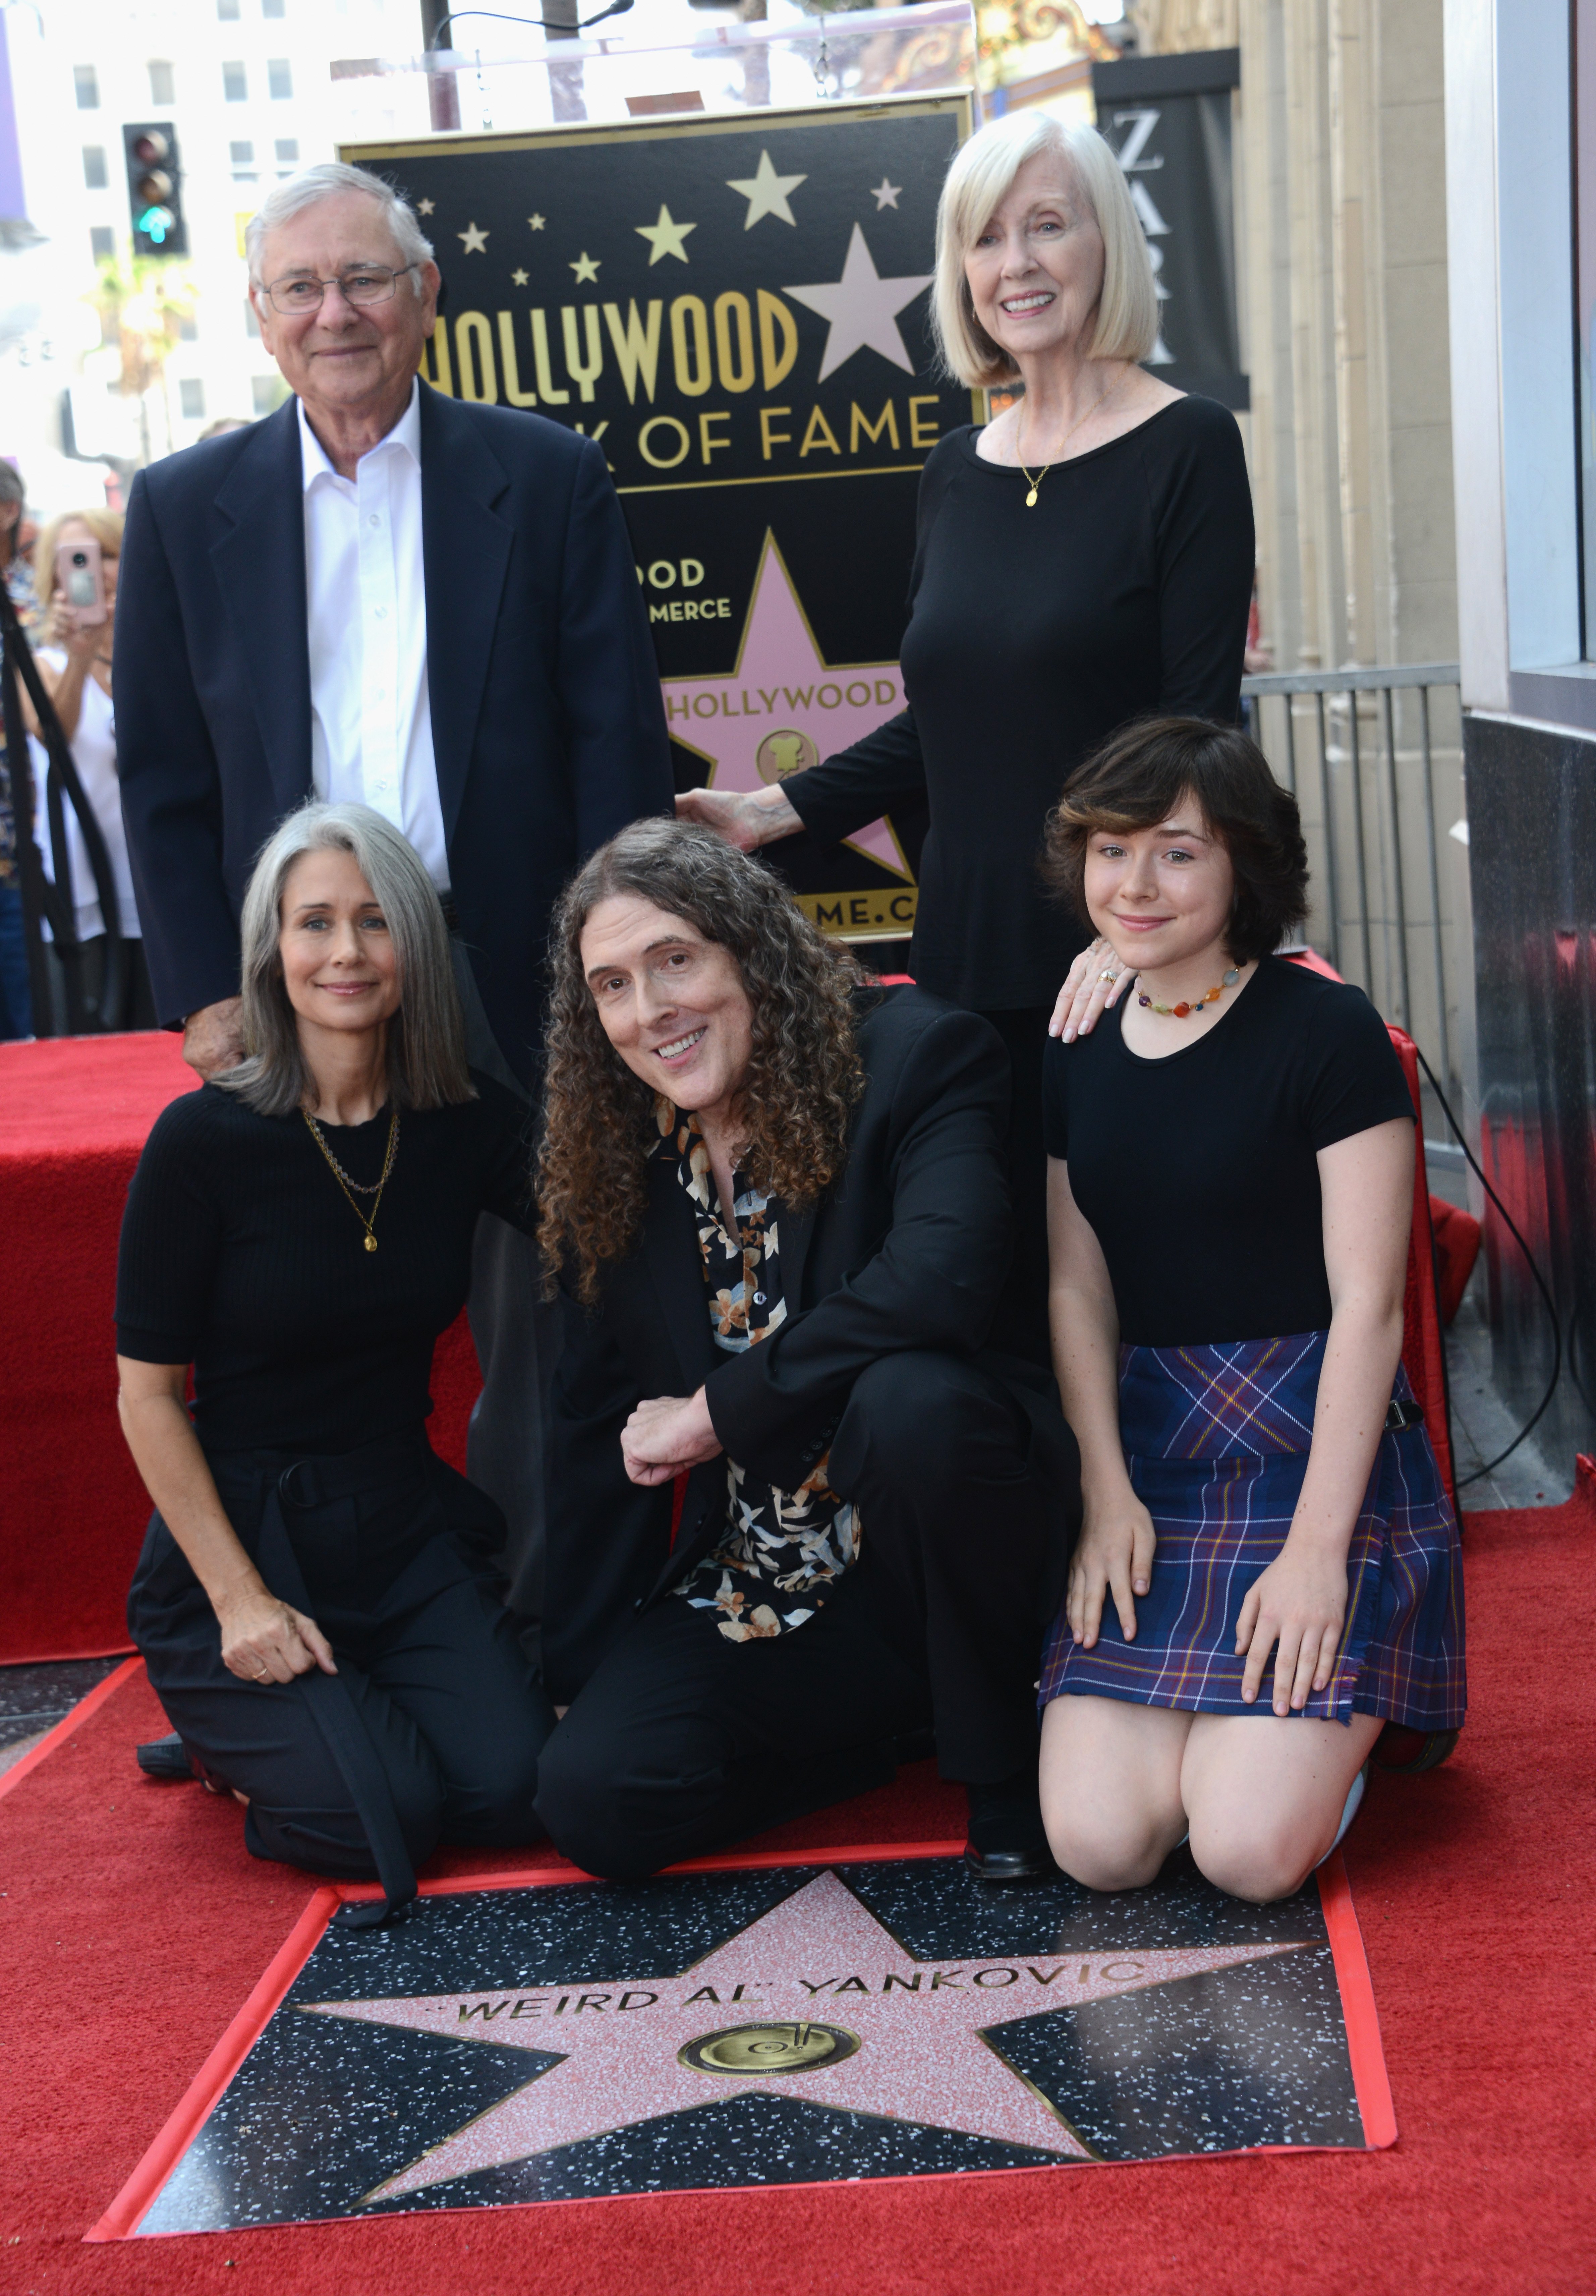 "Weird Al" Yankovic with his wife, daughter, and parents at his Star Ceremony On The Hollywood Walk Of Fame on August 27, 2018, in Hollywood, California. | Source: Getty Images